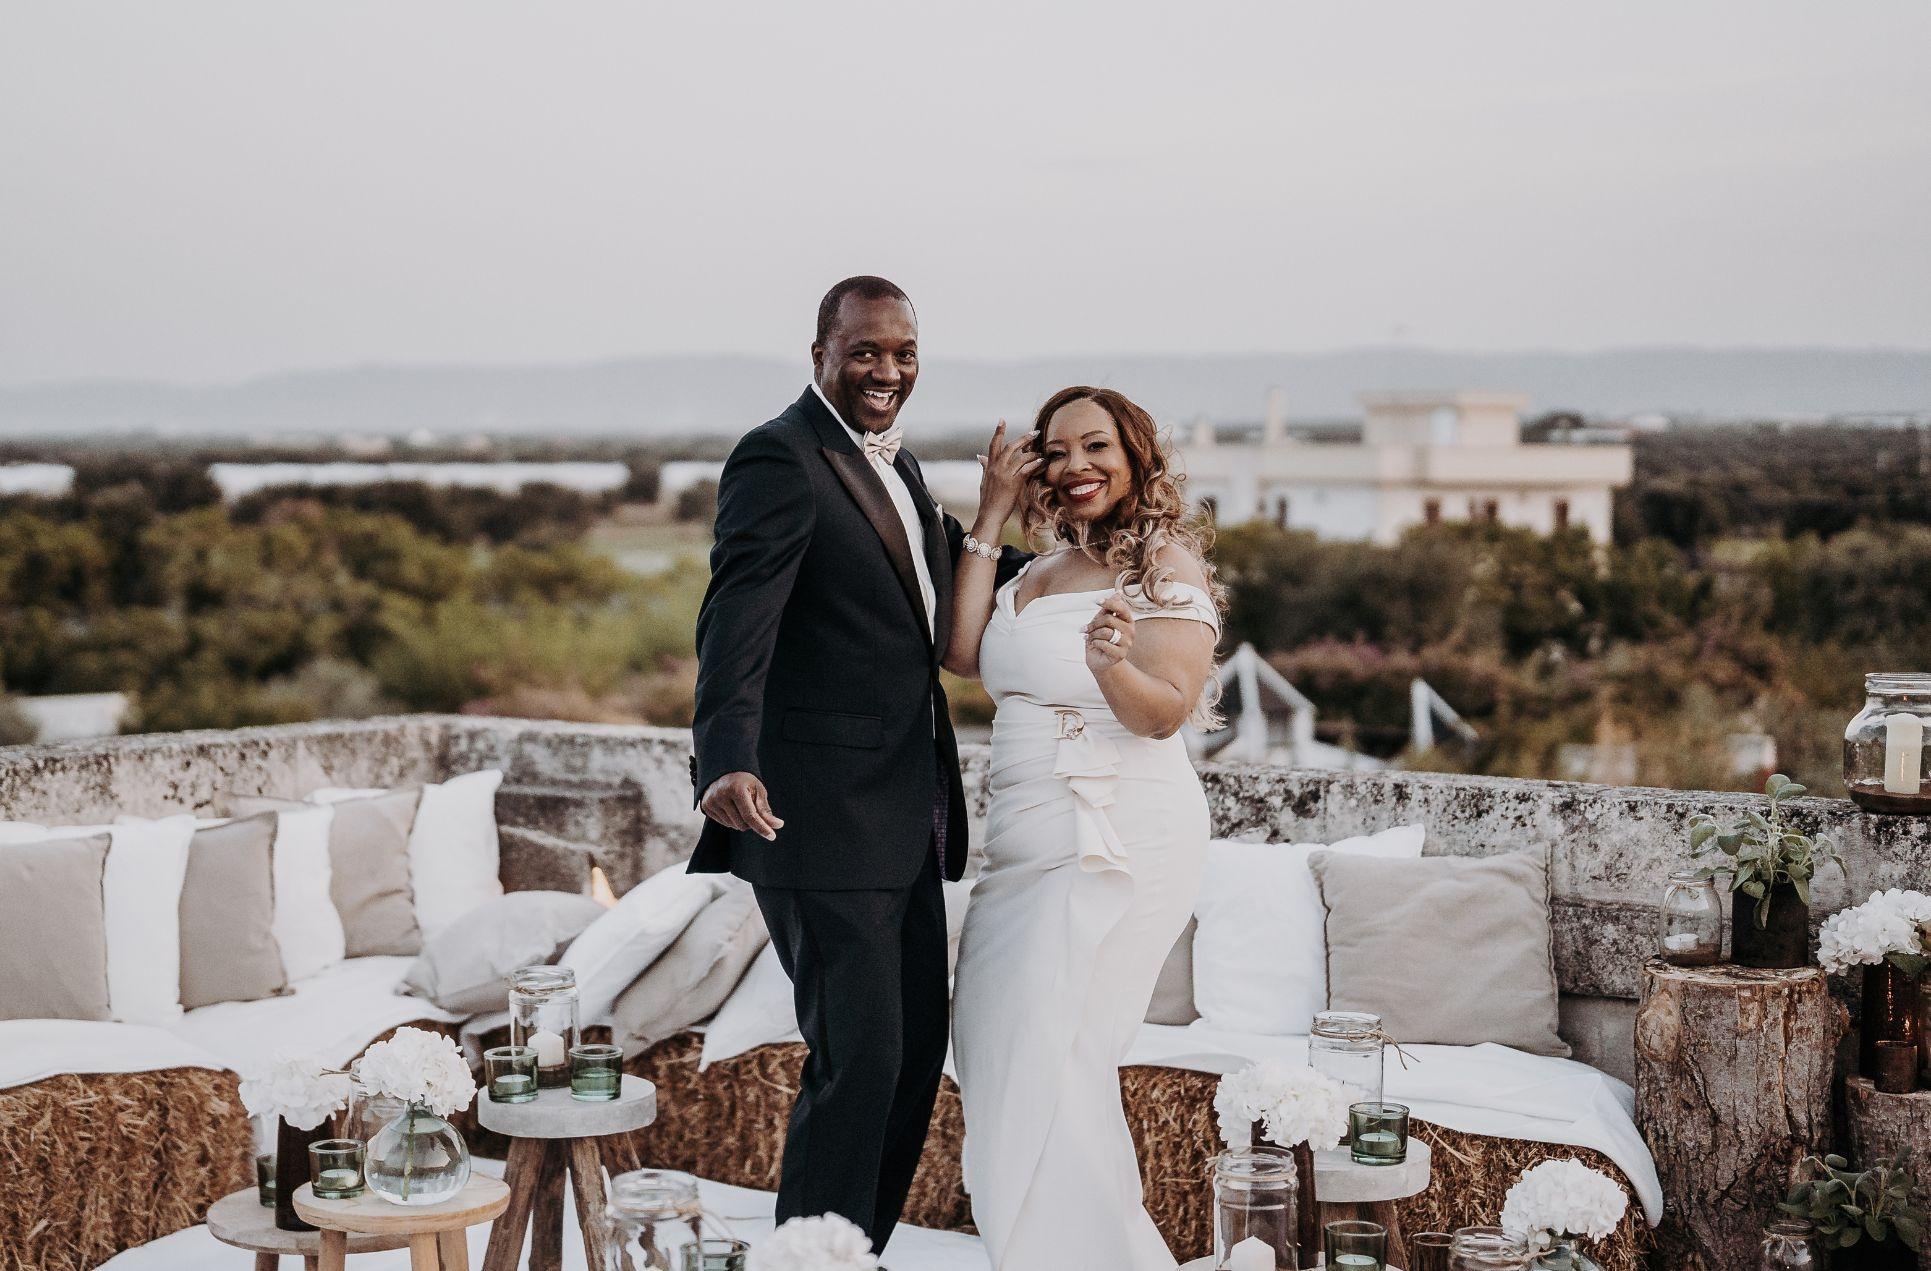 Borgo Egnazia Wedding: An intimate wedding in the heart of the Itria valley